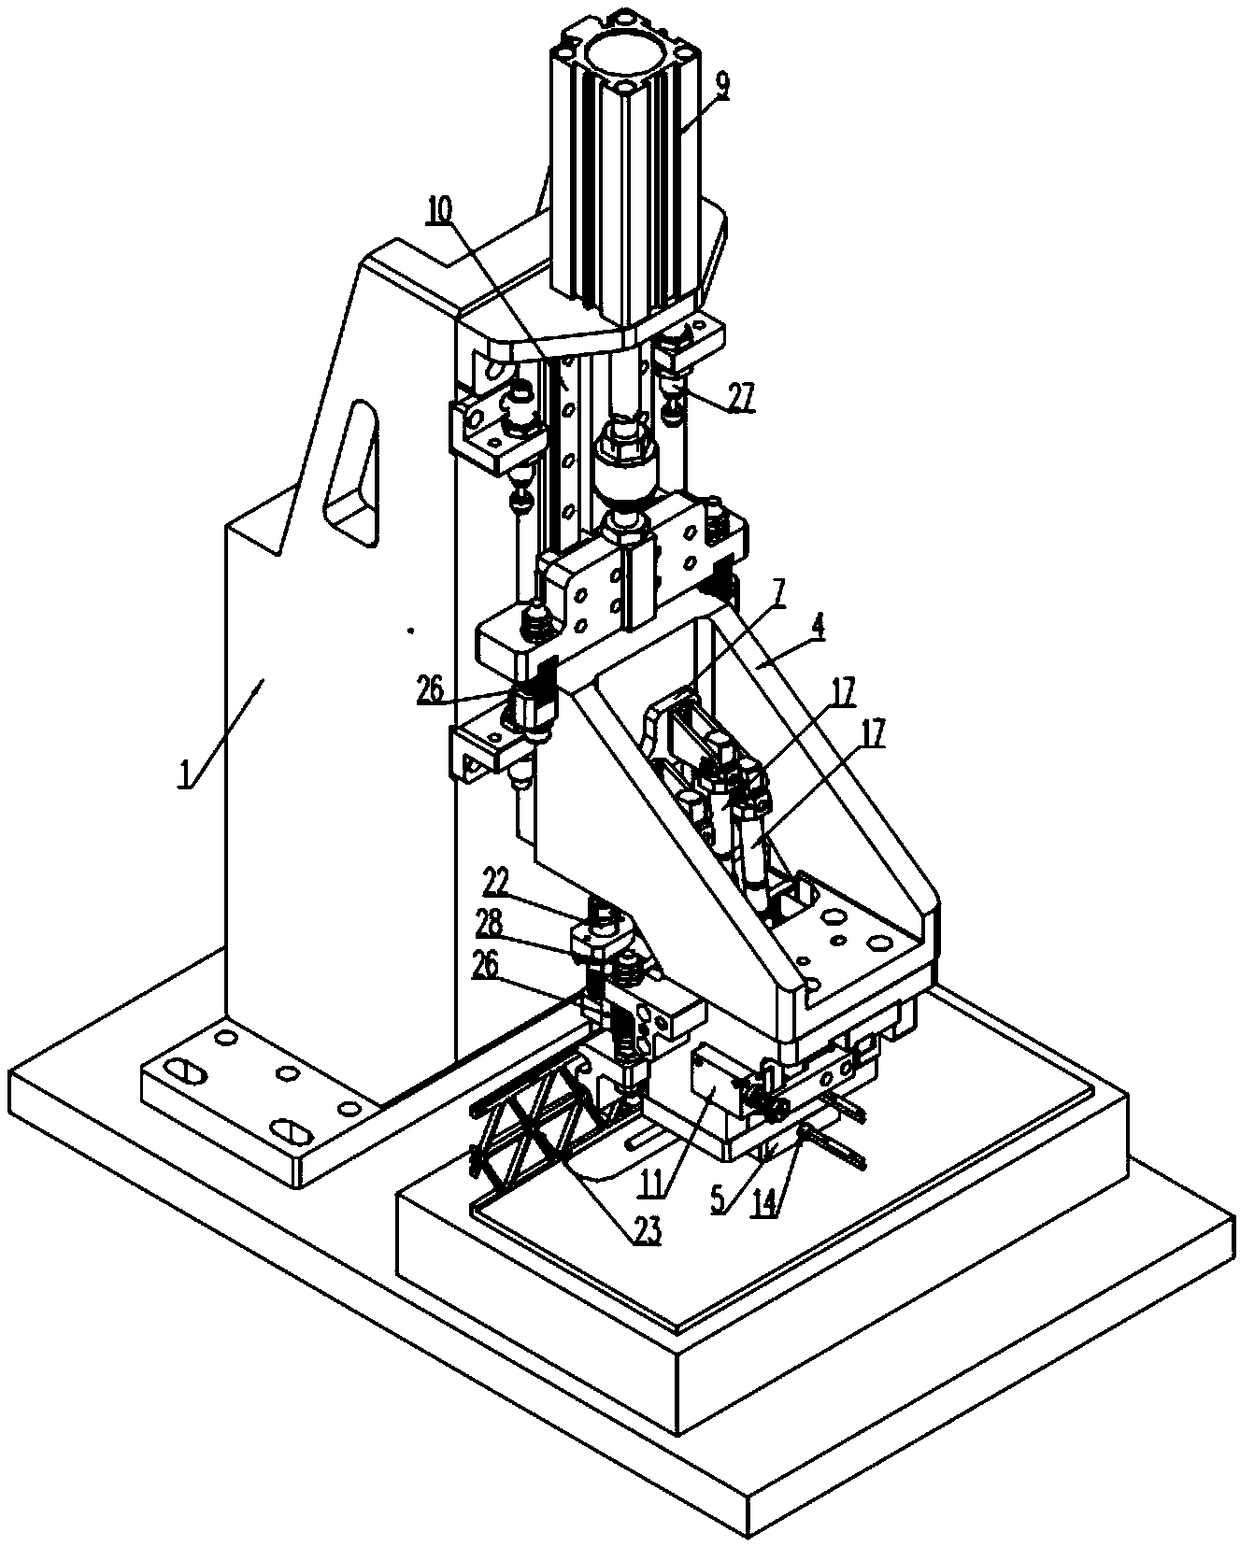 Equipment used for conducting positioning and pressure maintaining on L-shaped part